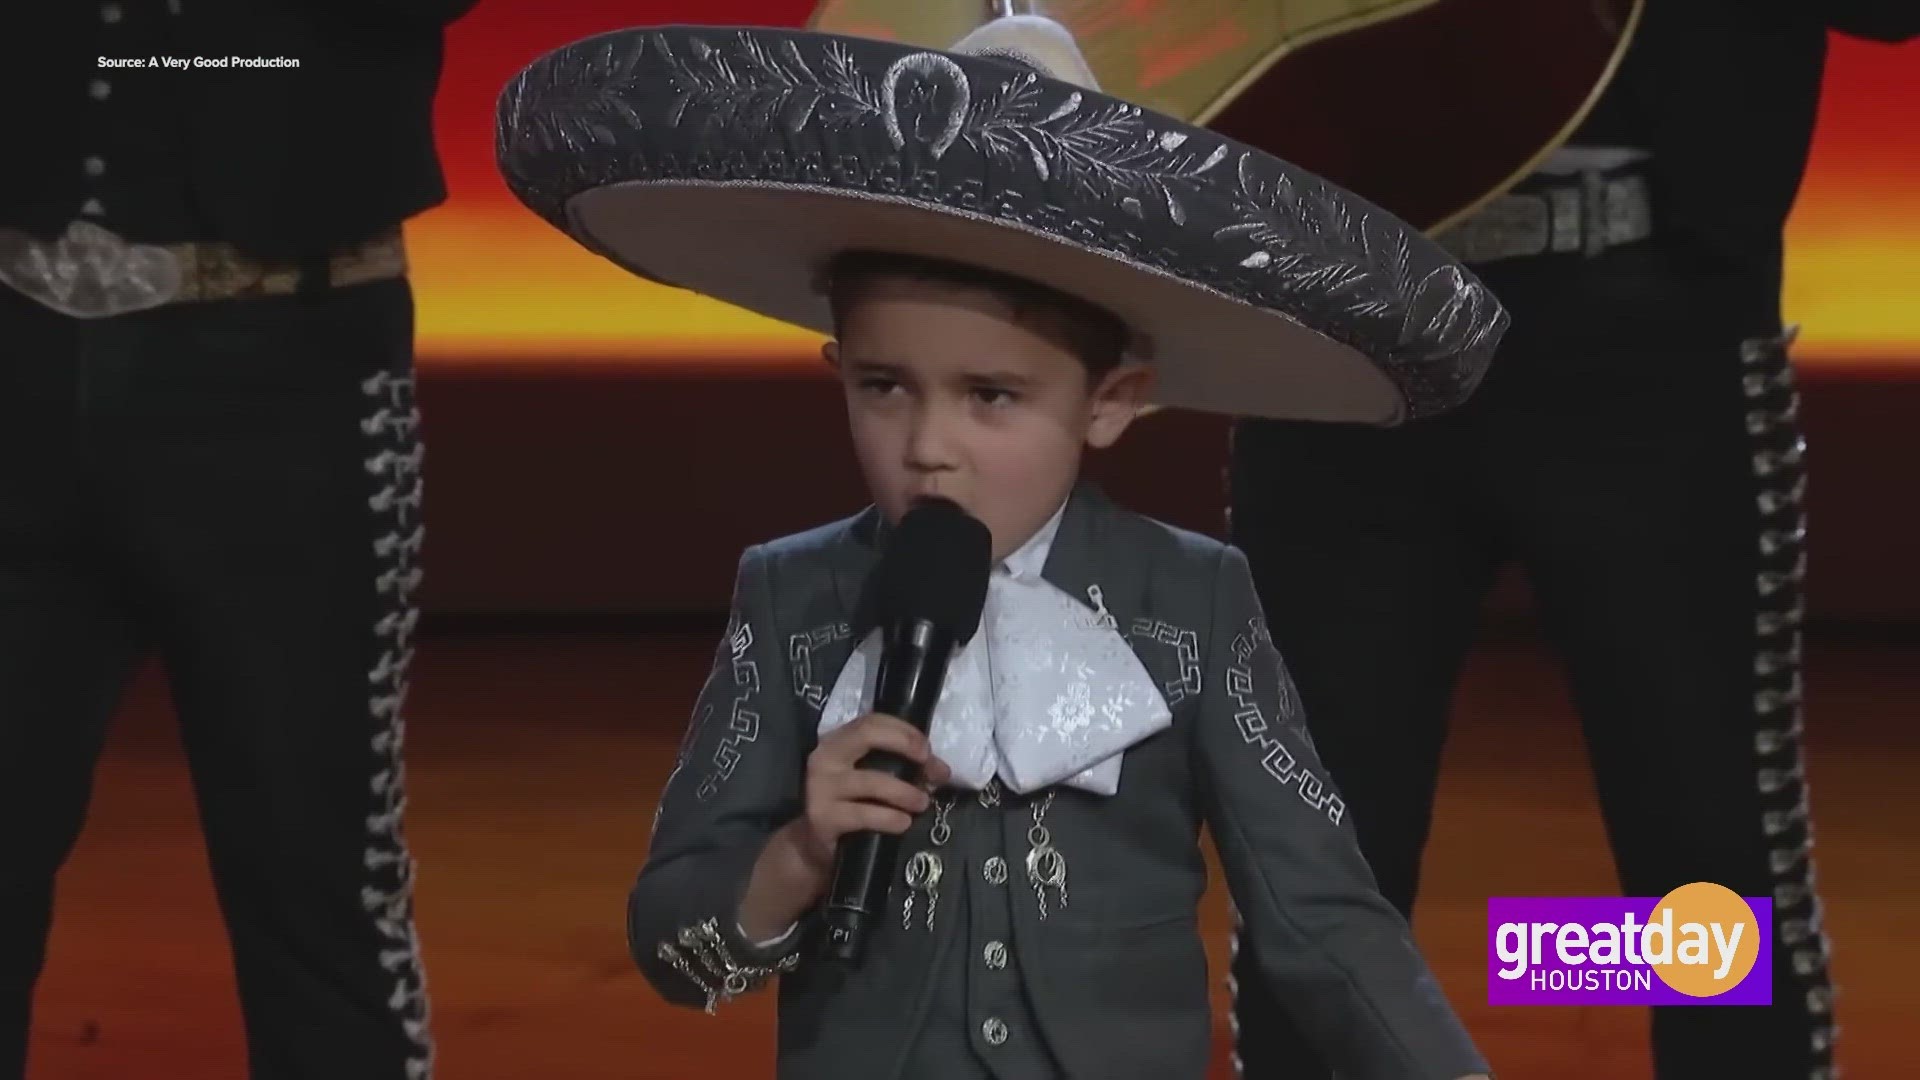 In celebration of International Mariachi Week, we introduce you to the "World's Youngest Professional Mariachi"